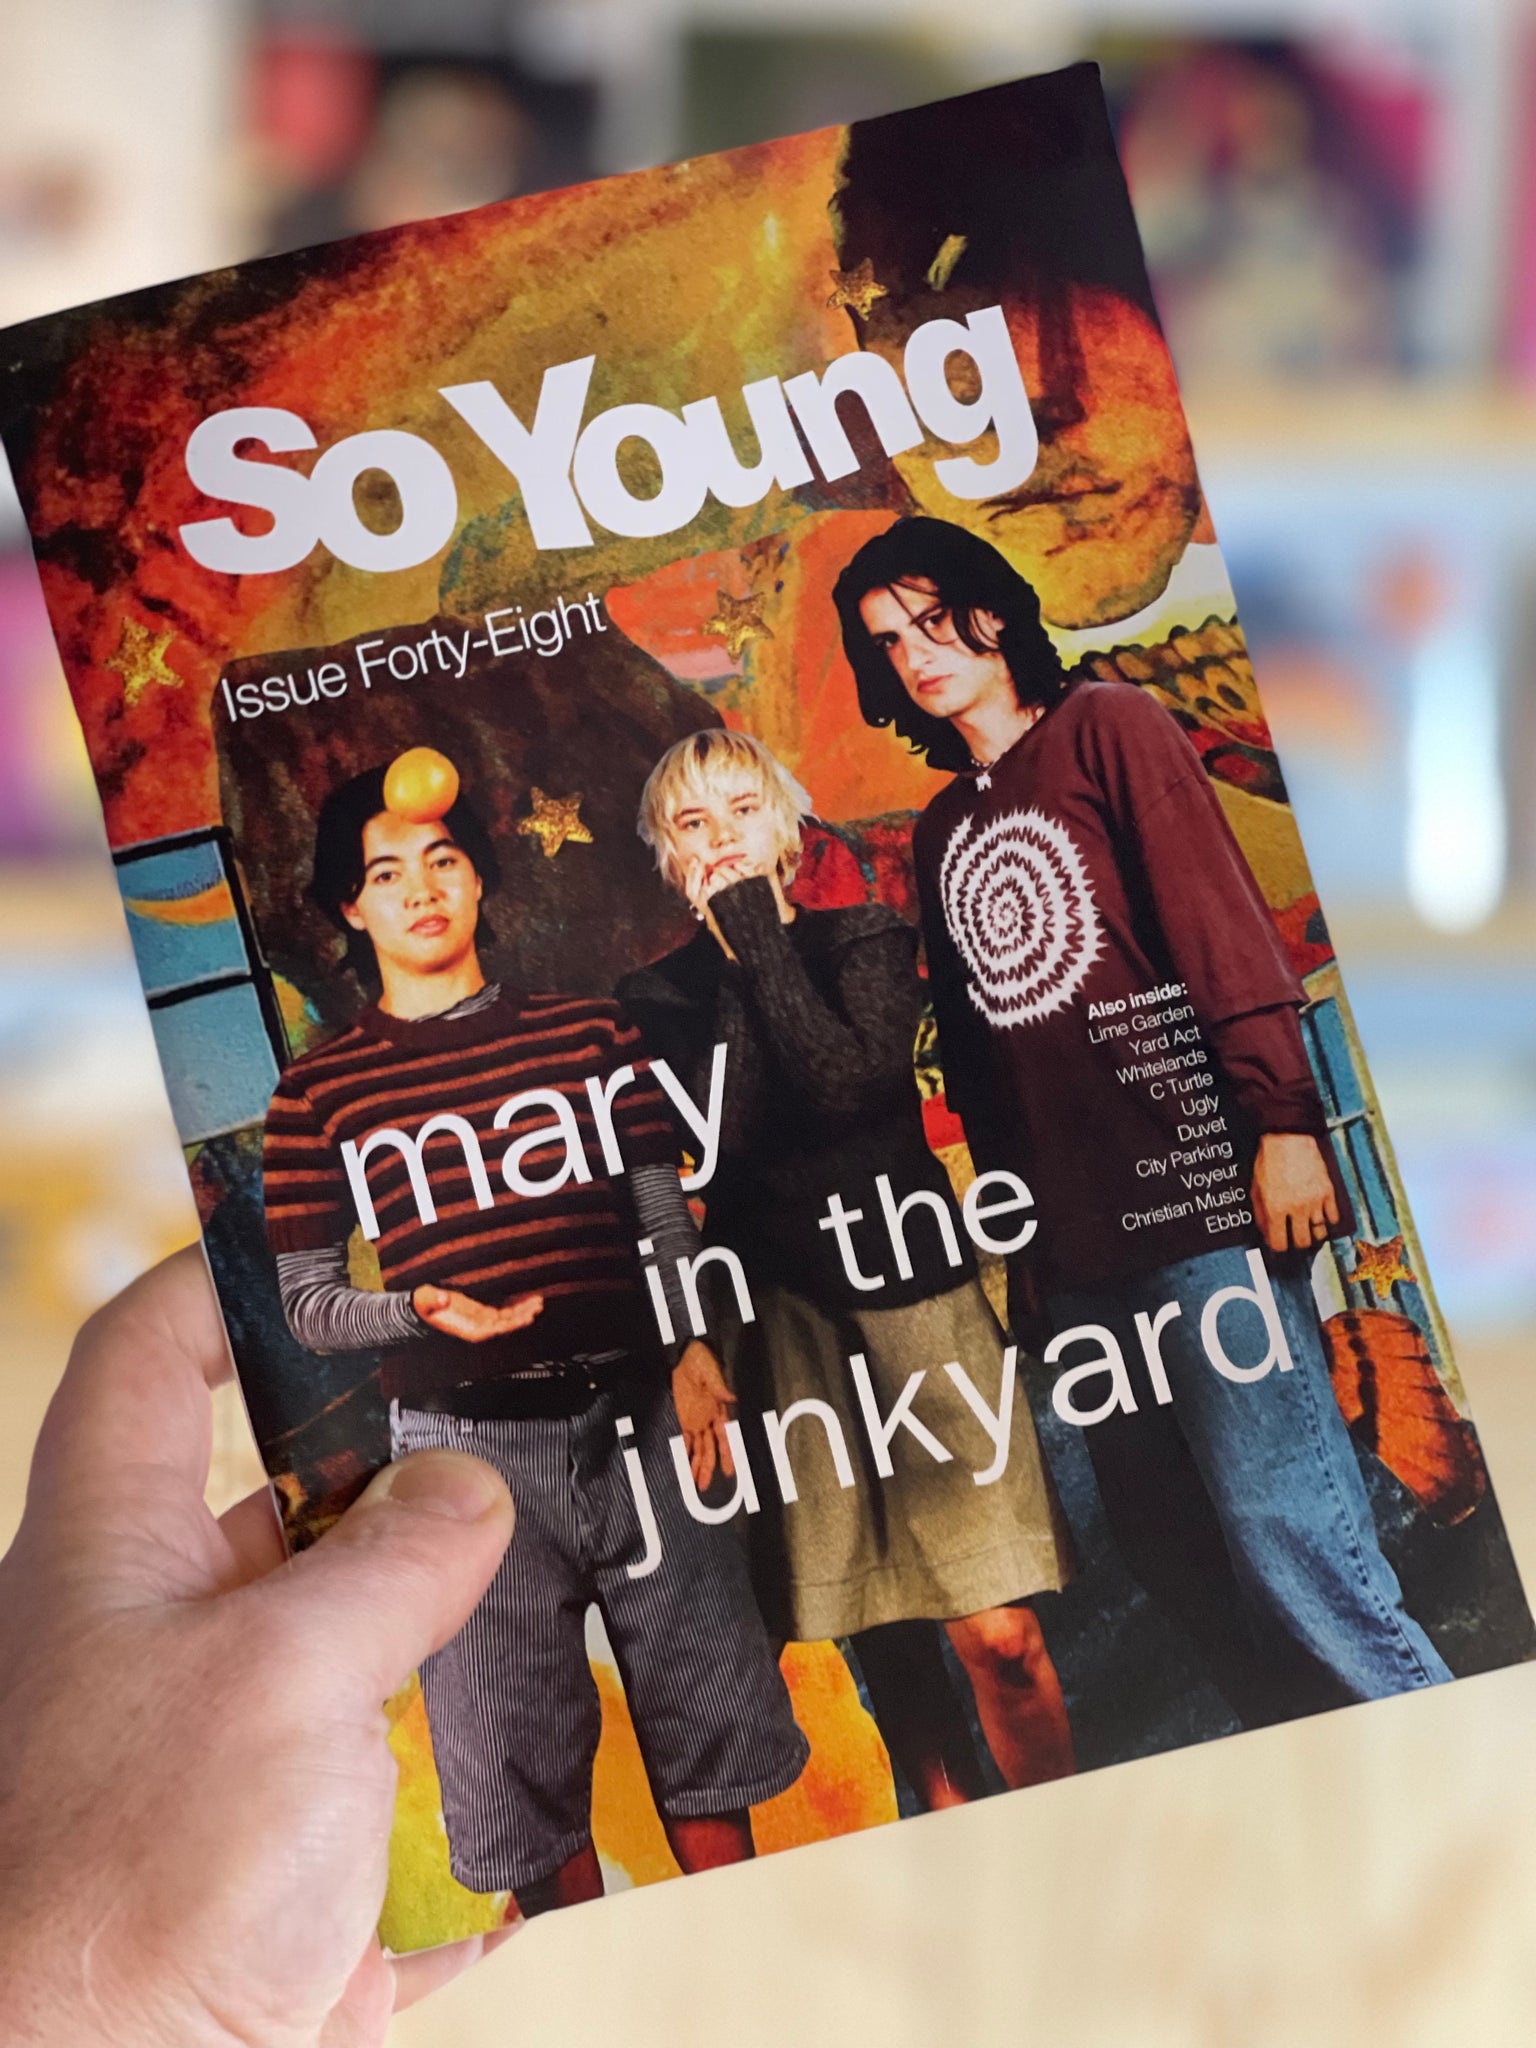 So Young - Issue Forty Eight